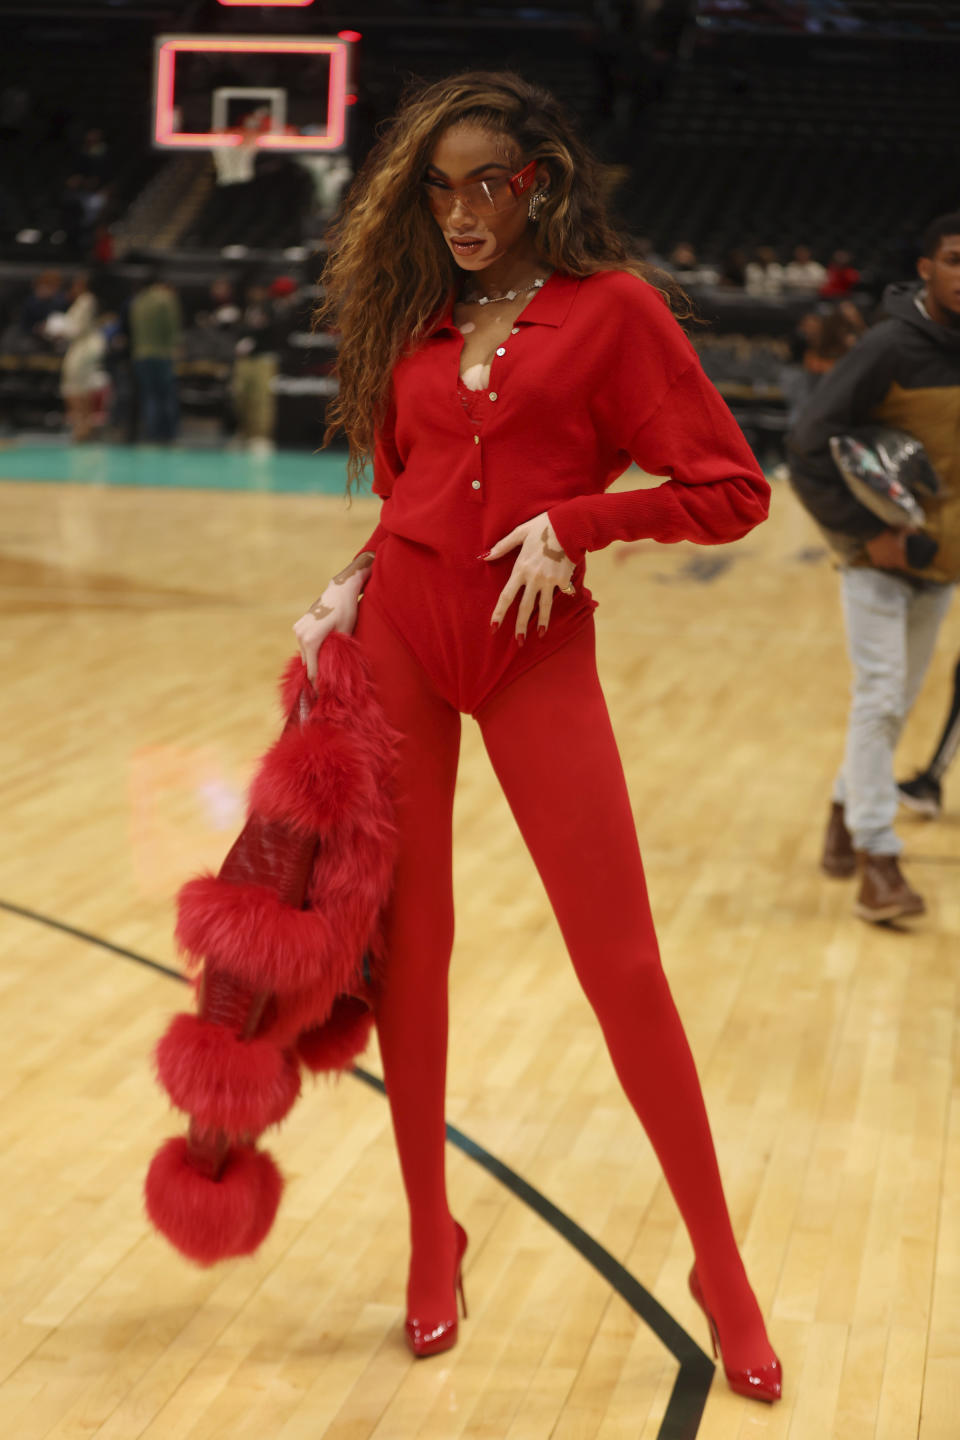 Harlow rocked a festive, all-red look while attending the Washington Wizards vs. Orlando Magic game on Dec. 26. (Photo via mpi34/MediaPunch/IPX)